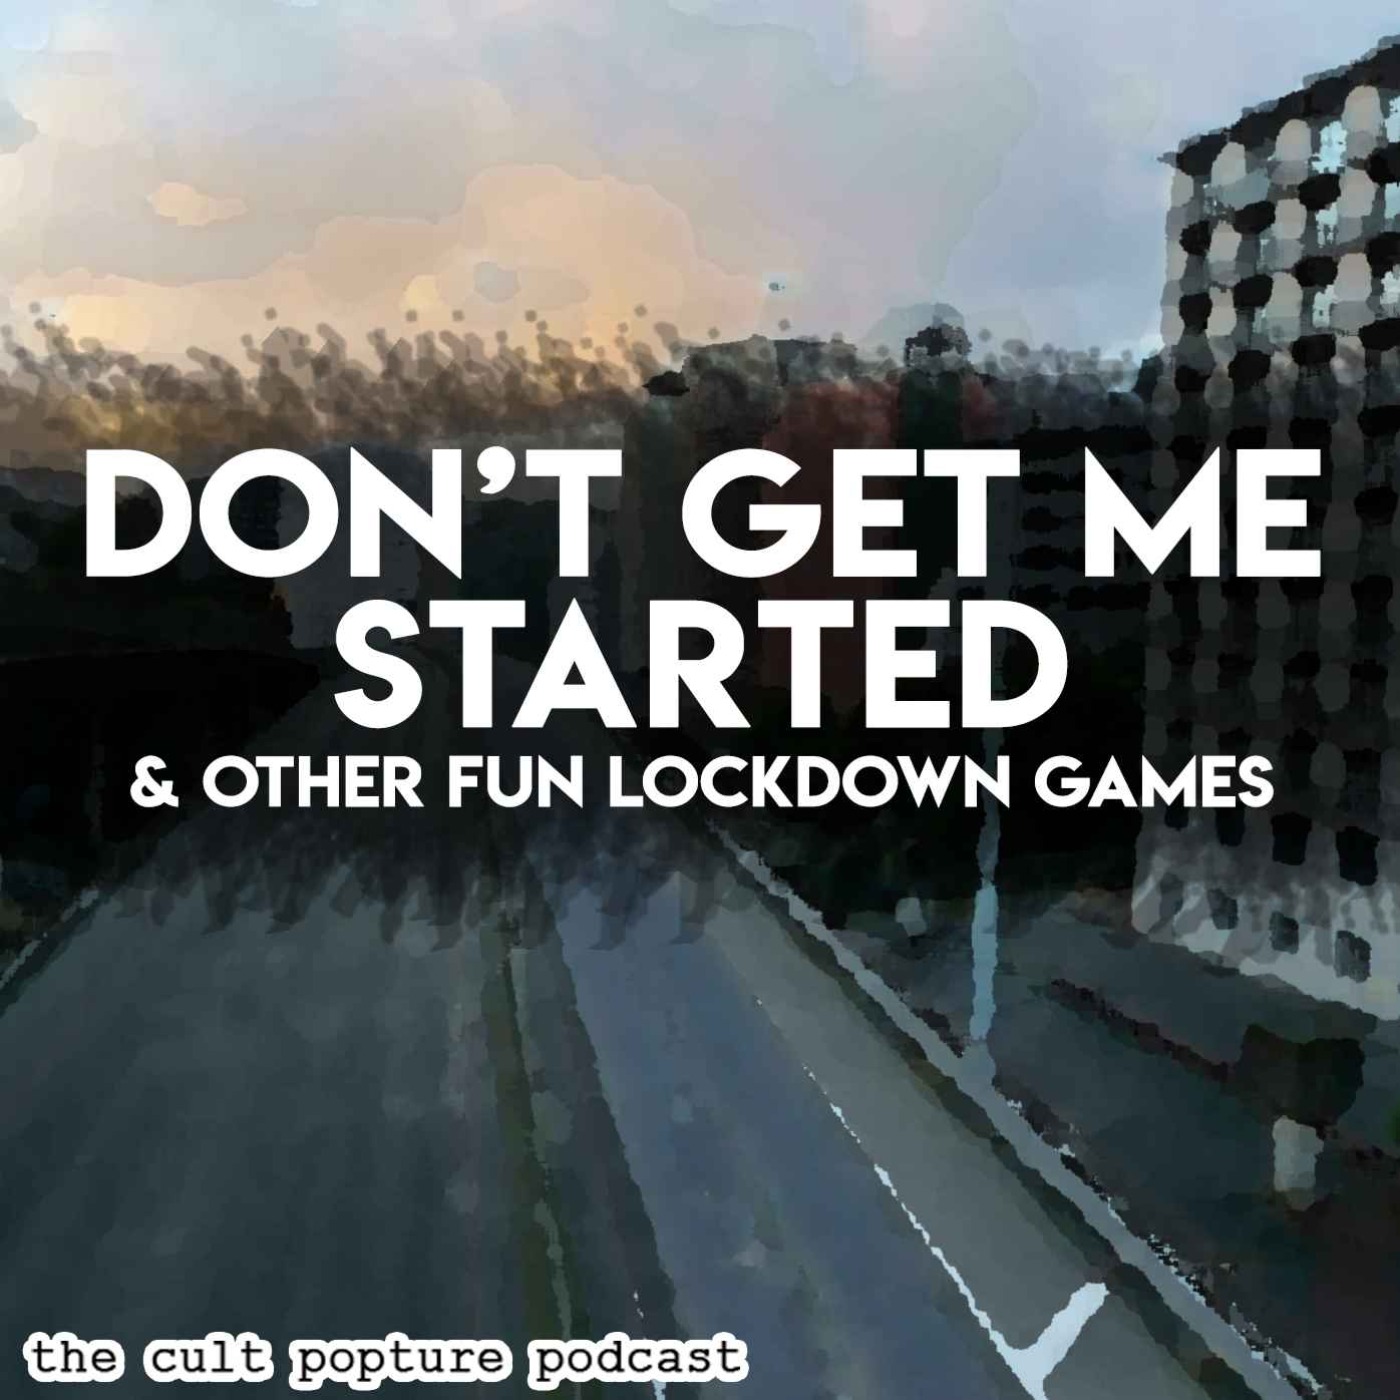 DON'T GET ME STARTED & Other Fun Lockdown Games | The Cult Popture Podcast